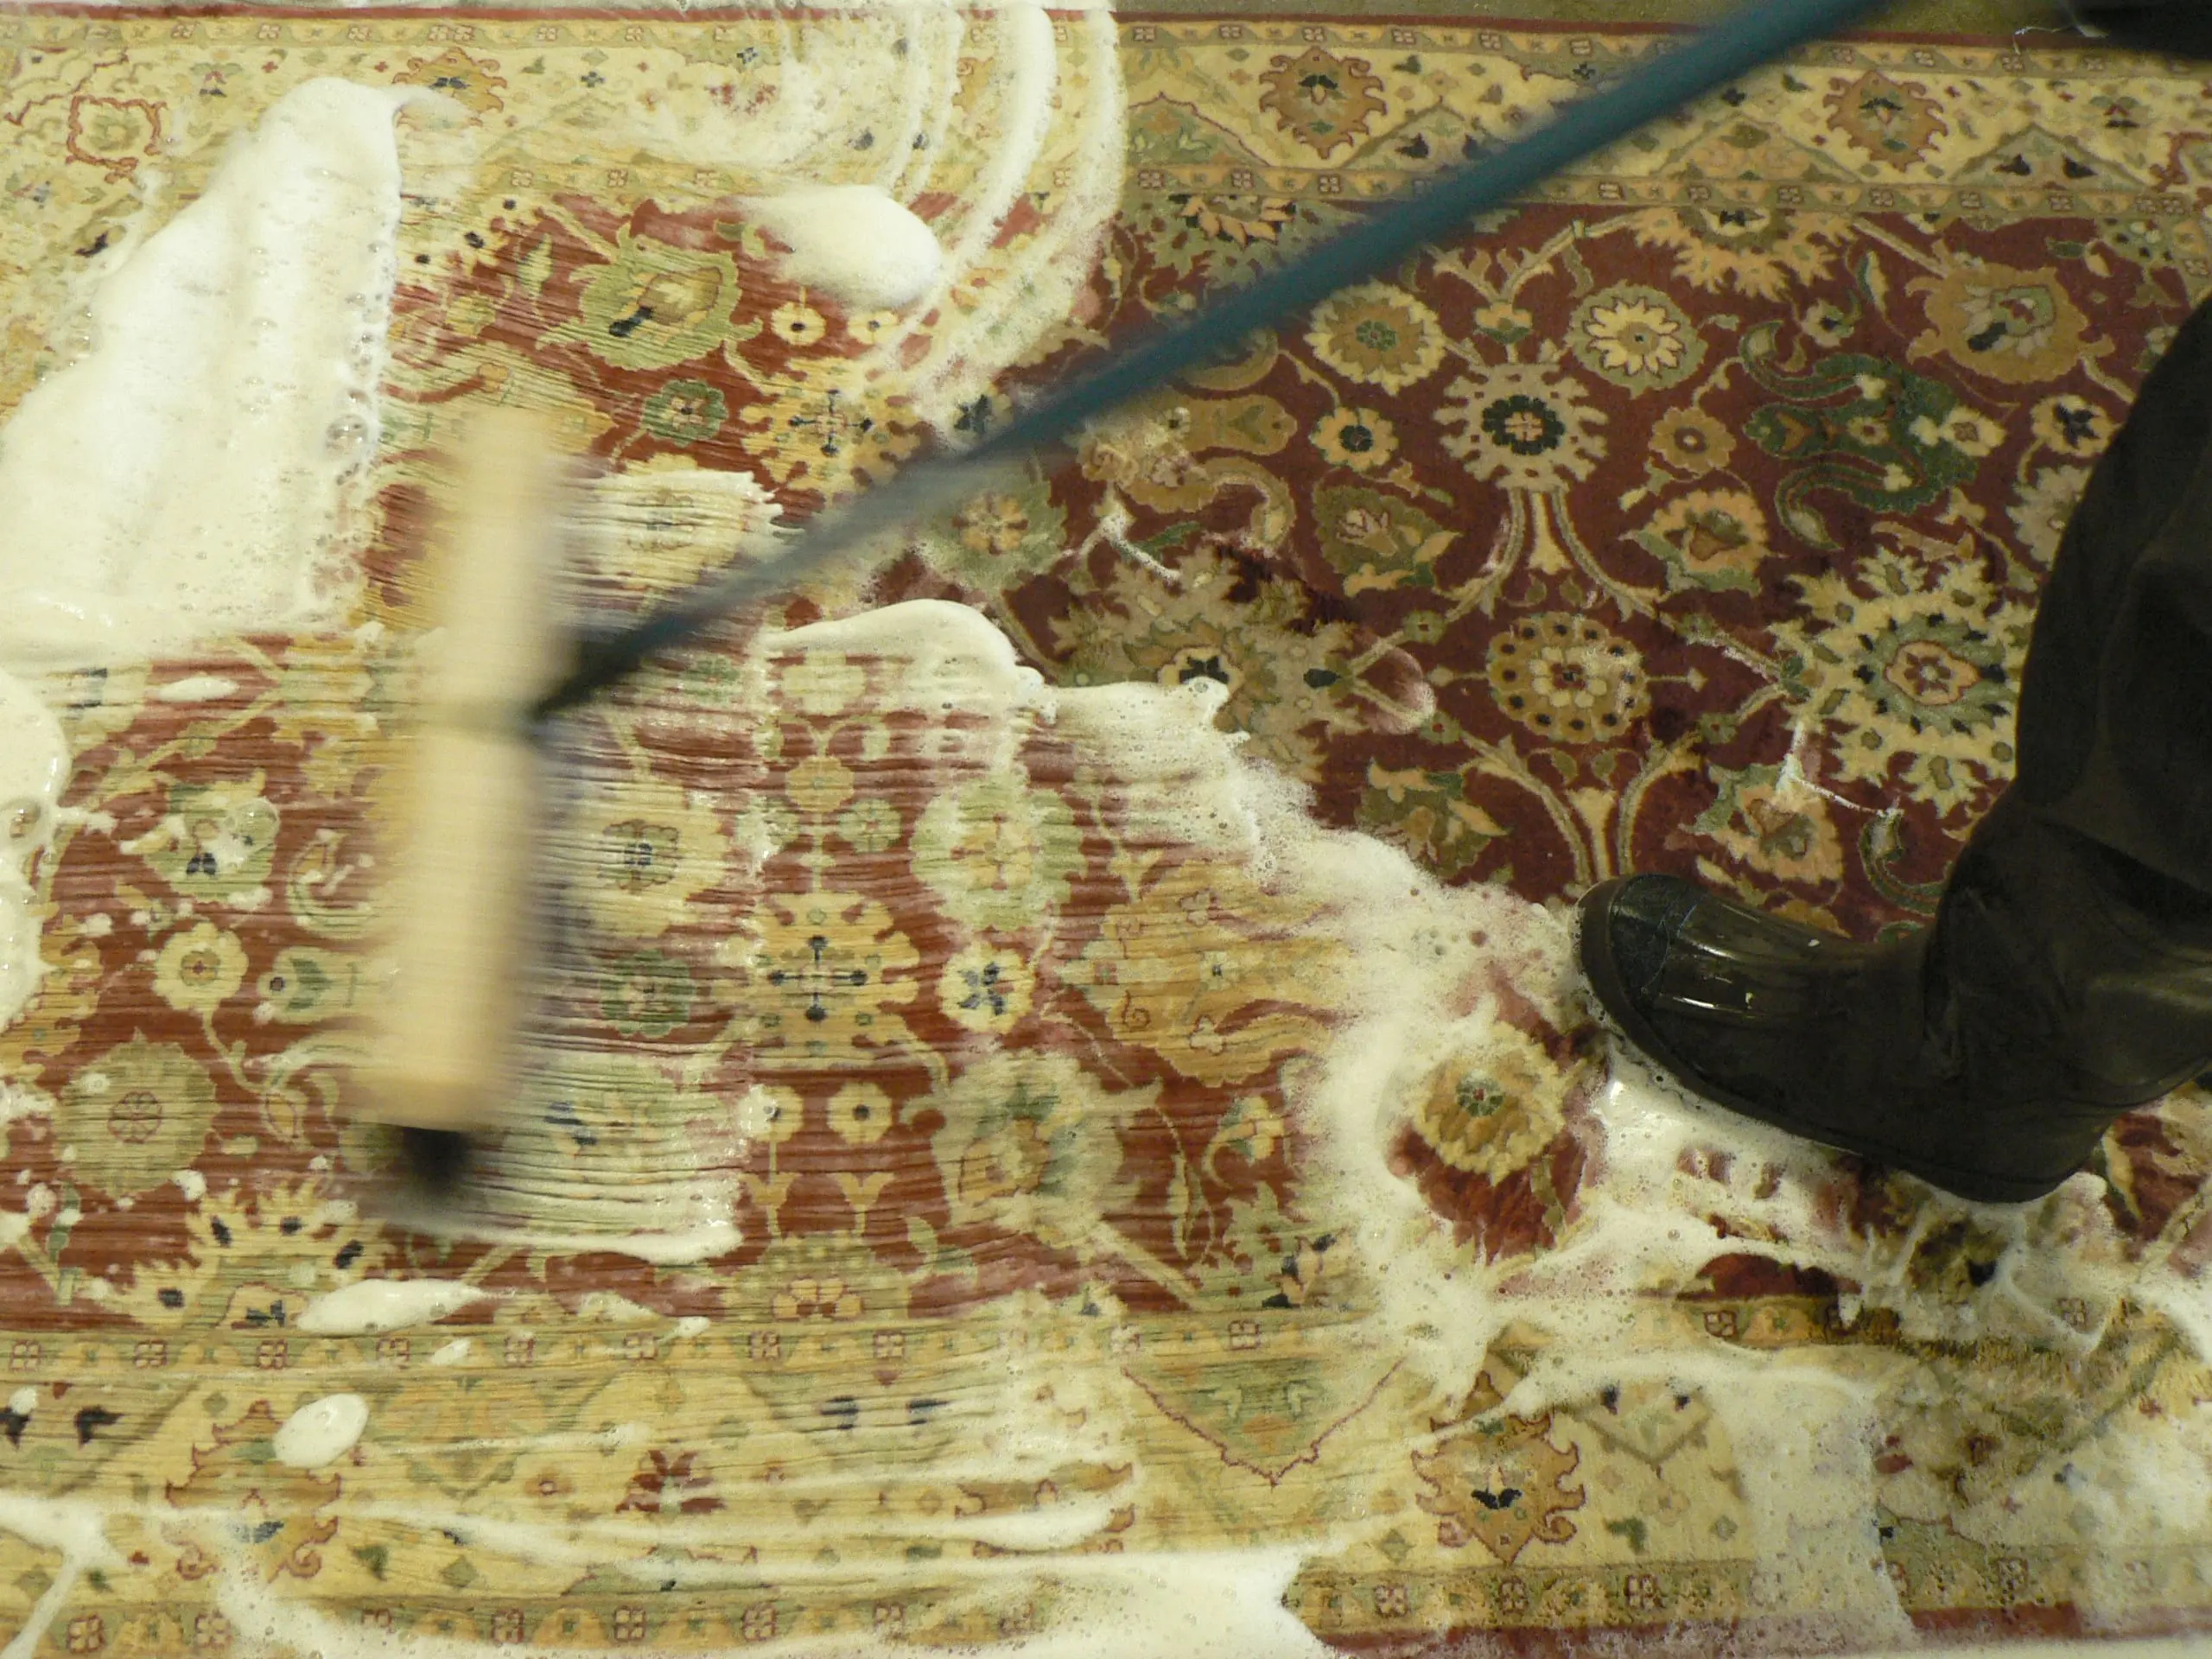 cleaning a rug - rug wash